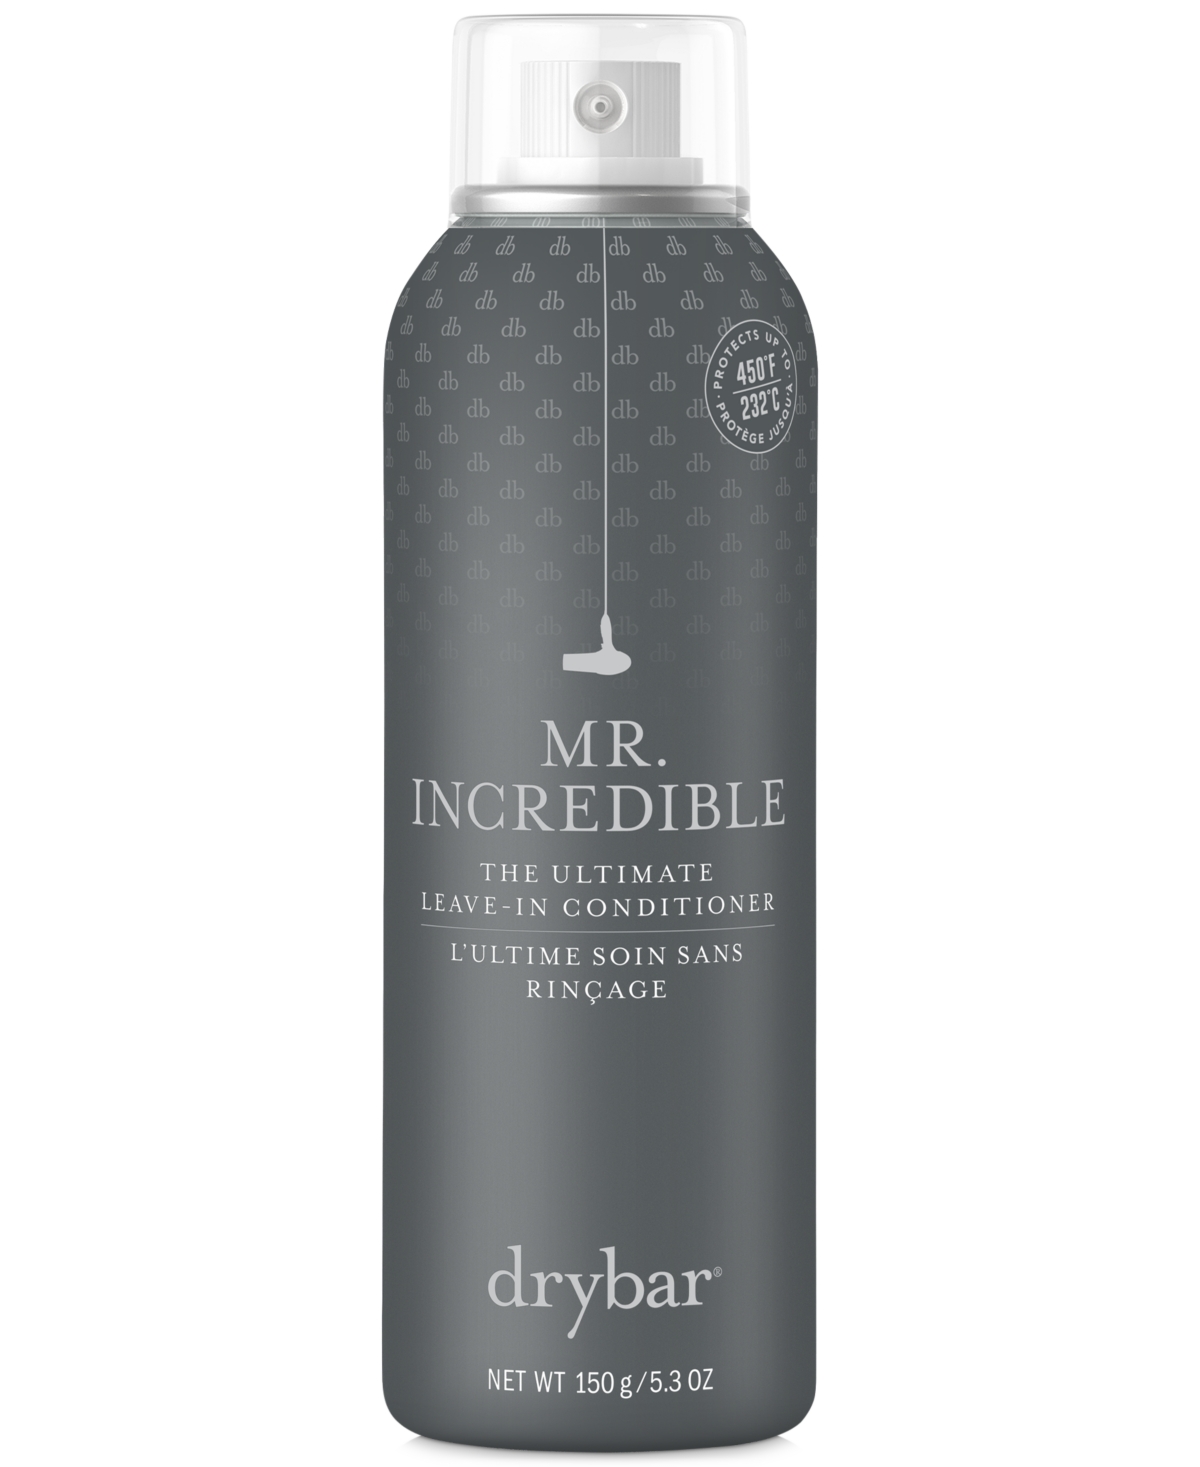 Mr. Incredible The Ultimate Leave-In Conditioner, 5.3-oz.